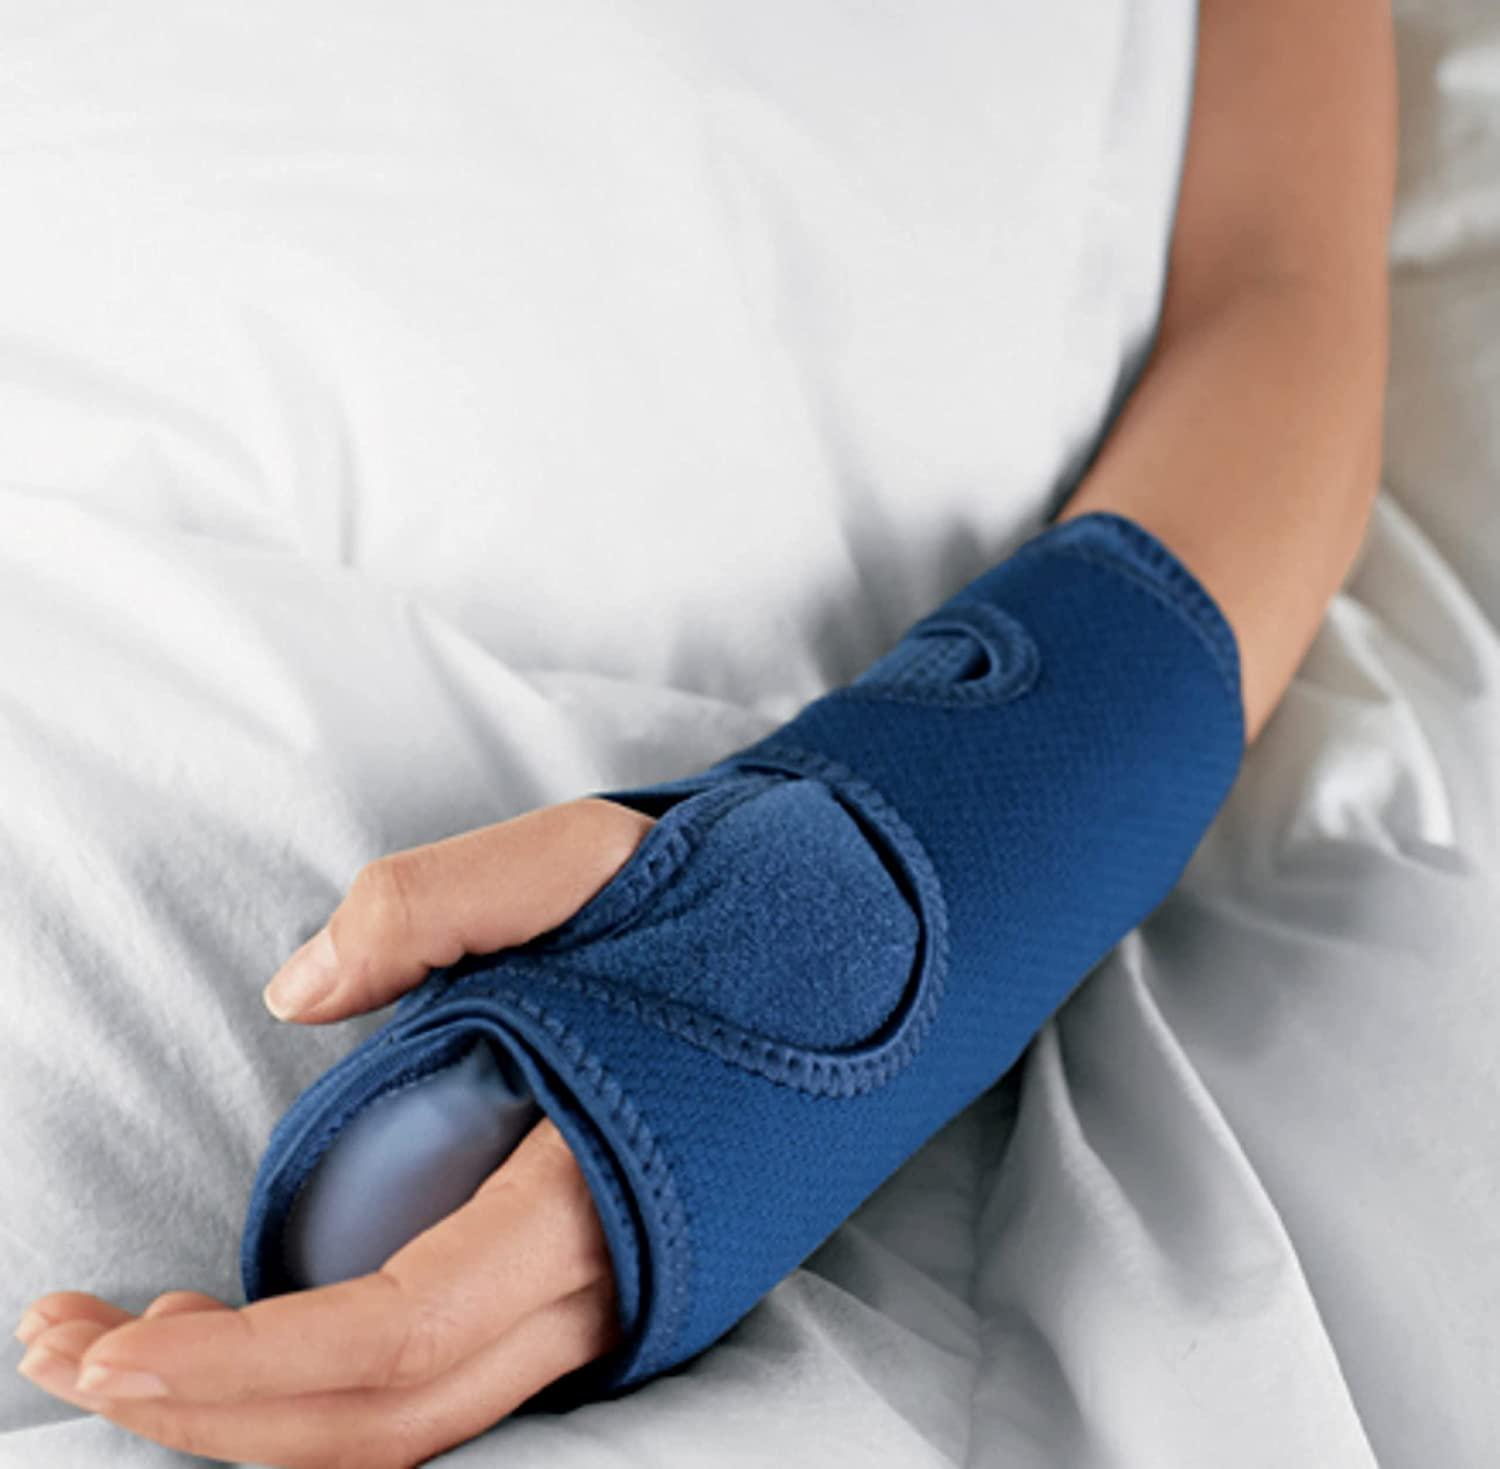 ACE Night Wrist Sleep Support, Adjustable, Blue, Helps Provide Relief from  Symptoms of Carpal Tunnel Syndrome, and other Wrist Injuries Night Wrist  Support